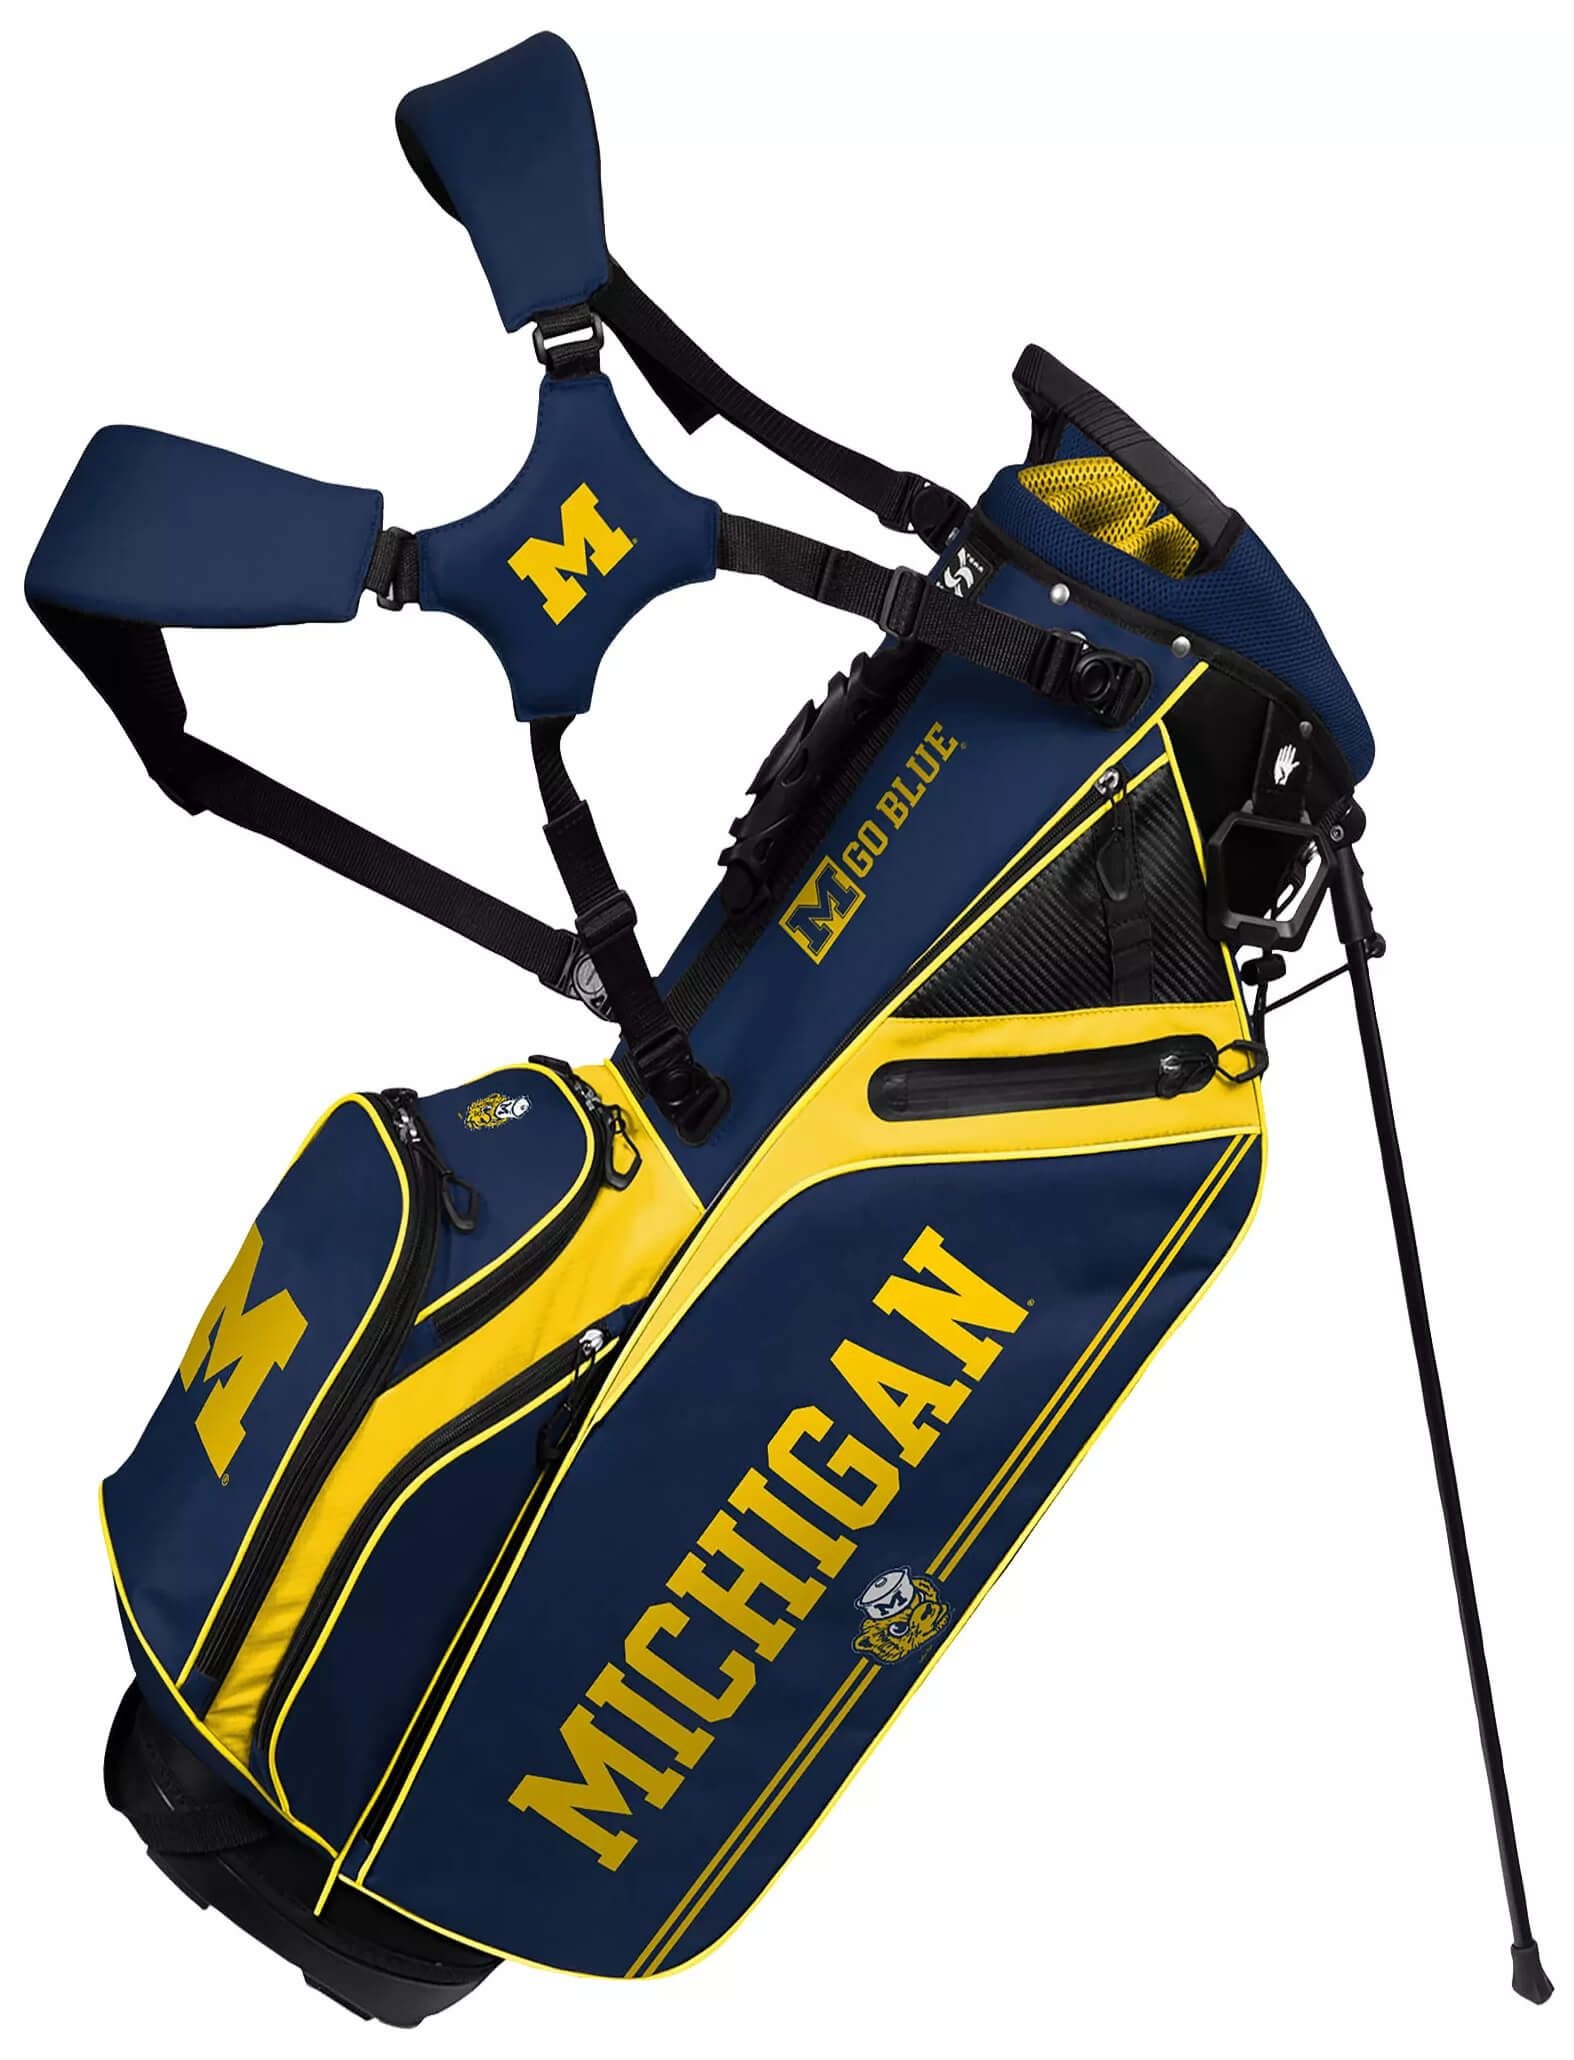 Michigan Athletics 〽️ on X: All bags (including crossbody bags, clear bags,  purses and fanny packs) are prohibited from being carried into Michigan  Stadium. Review the bag policy »    /